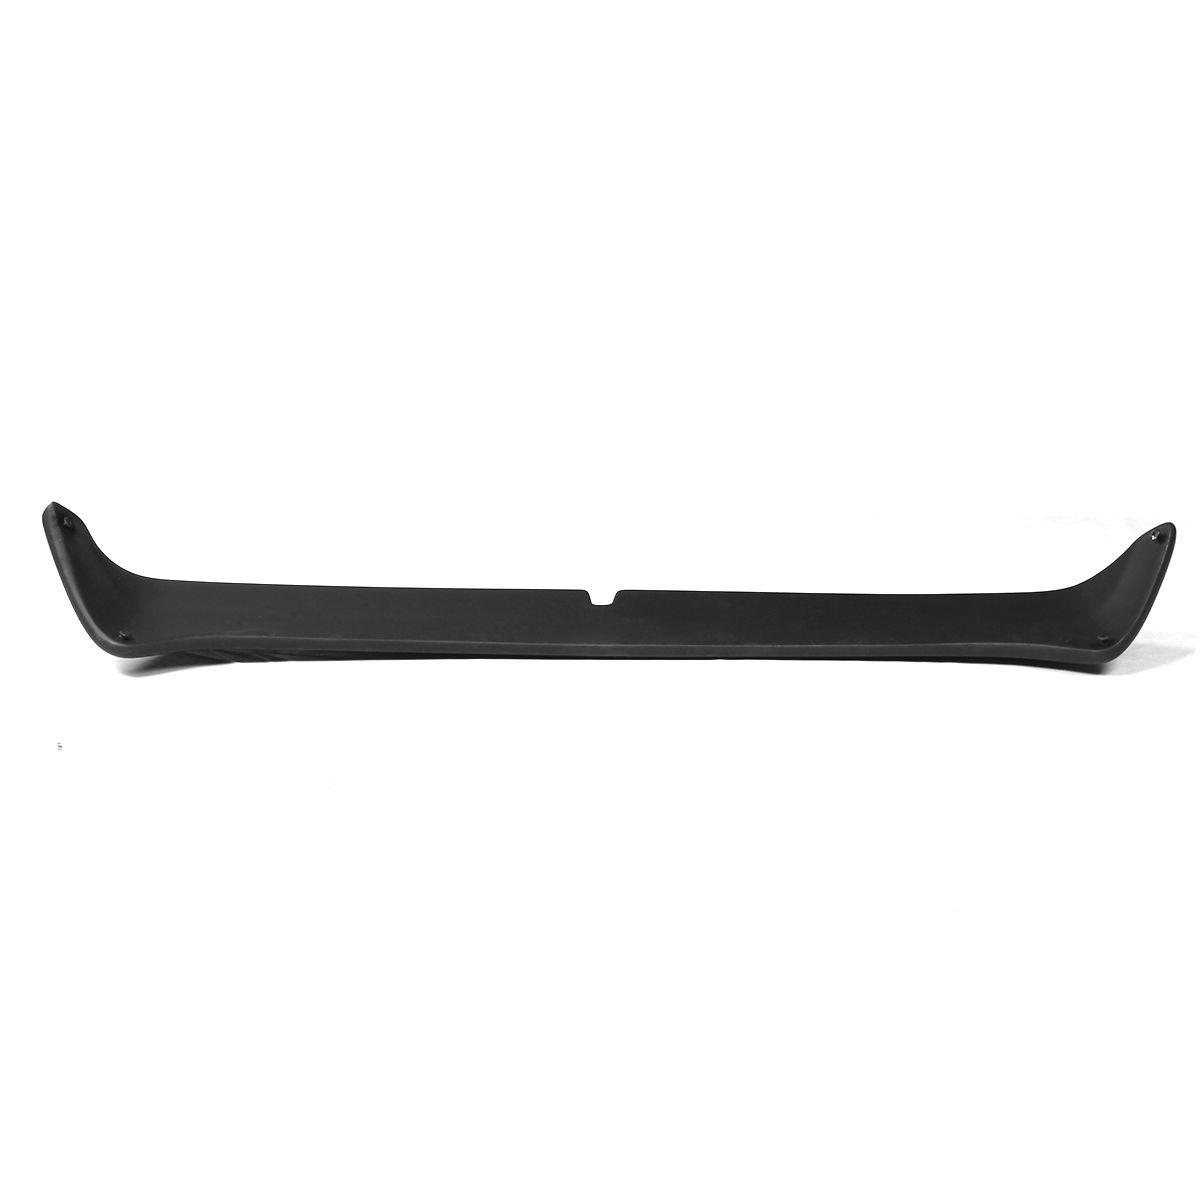 ABS-Unpainted-Black-Car-Rear-Roof-Spoiler-Wing-Lip-For-VW-Golf-MK4-IV-1578472